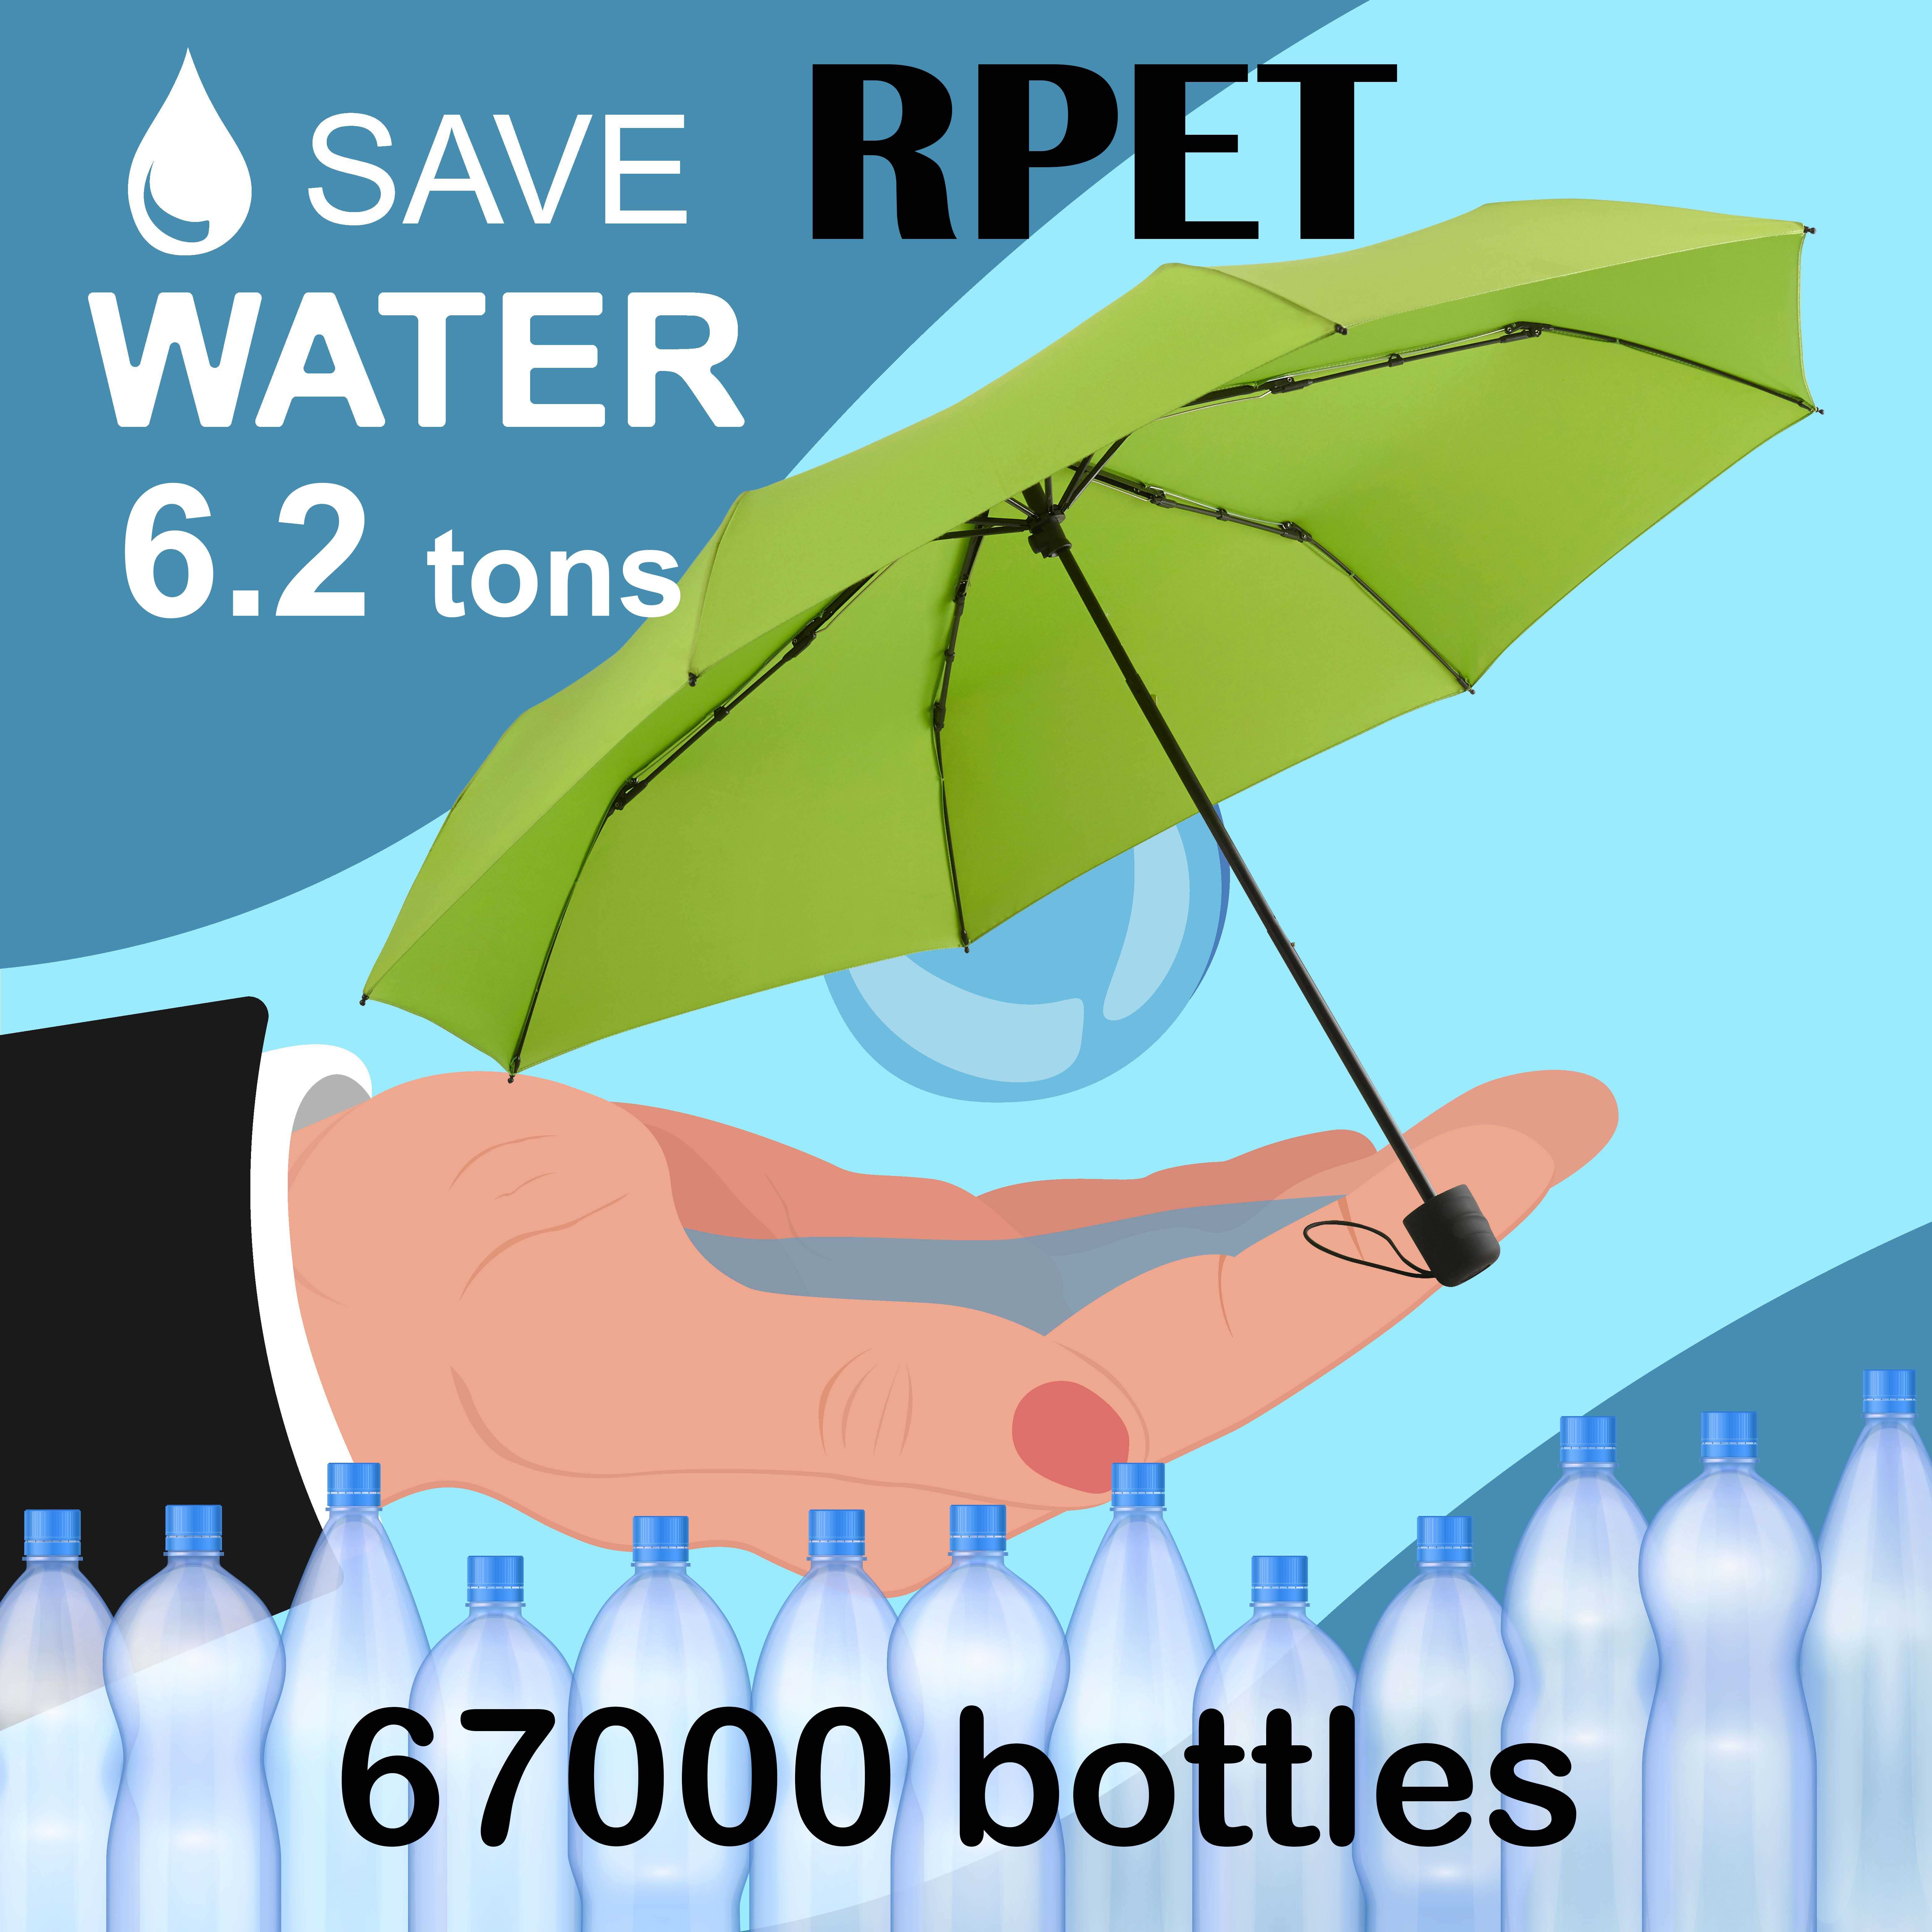 RPET Fabric--- New life for plastic water bottles